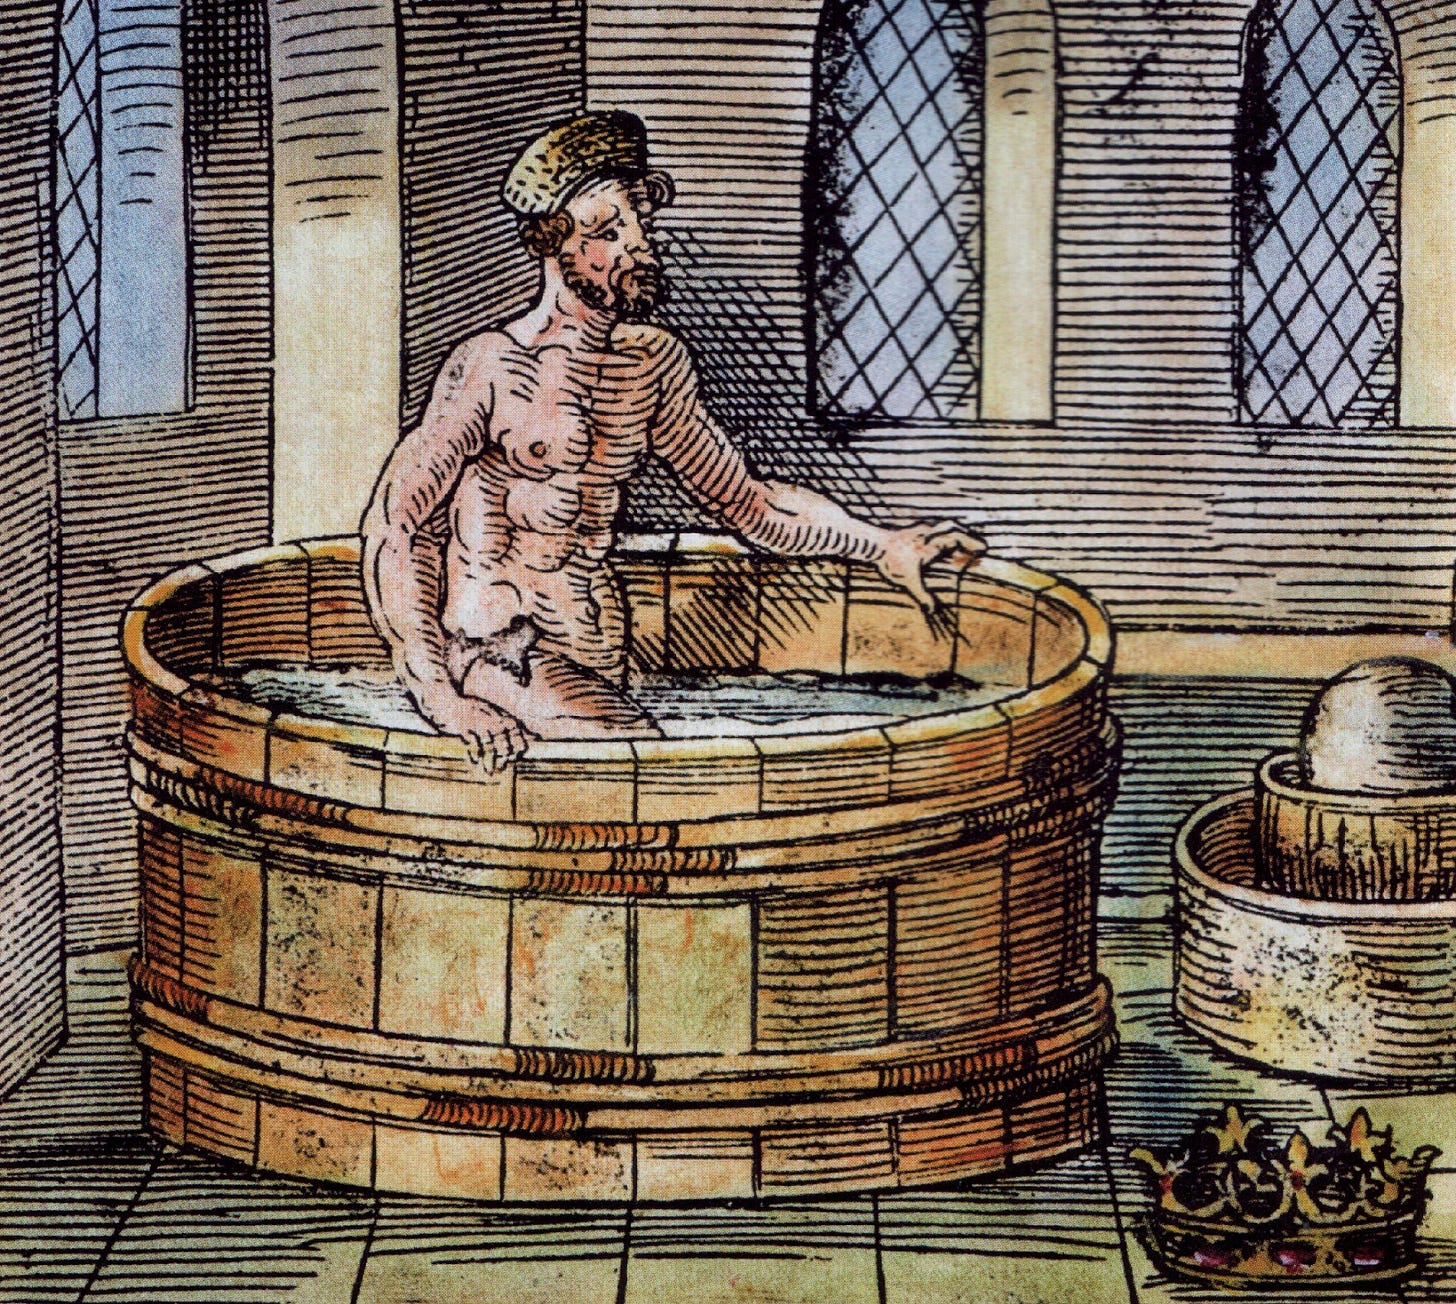 man in a bath with a crown nearby